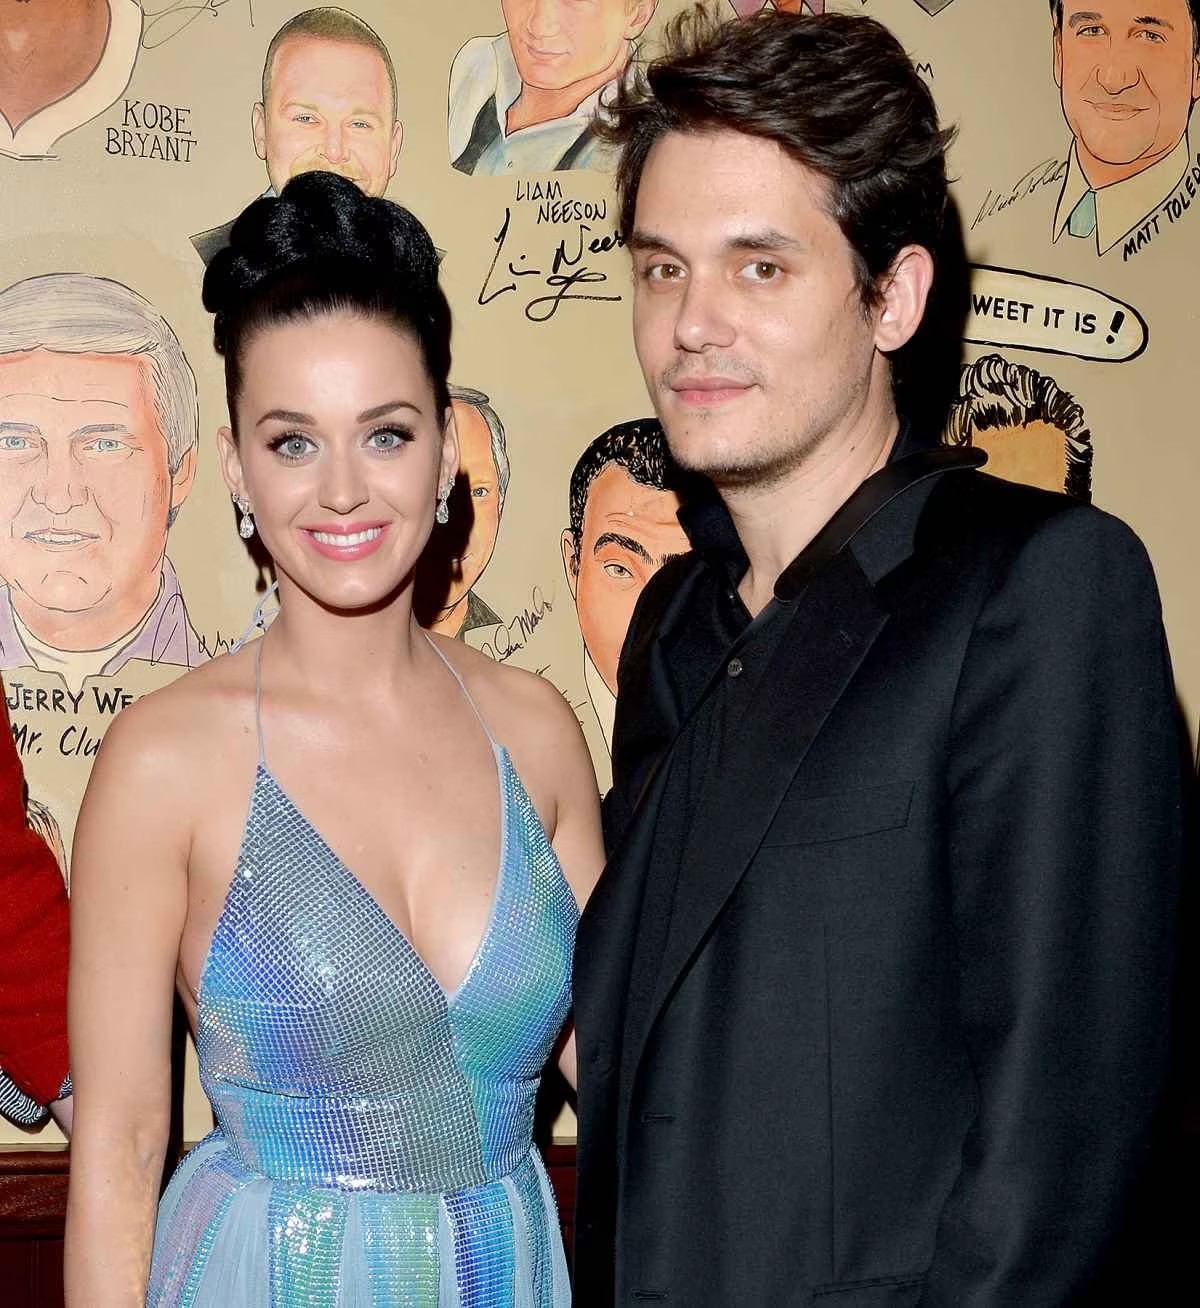 Katy Perry and John Mayer attend the Sony Music Entertainment Post-Grammy Reception at the Palm on Jan. 26, 2014, in Los Angeles. | Lester Cohen/Getty ImageLester Cohen/Getty Images for Sony Music Entertainments for Sony Music Entertainment